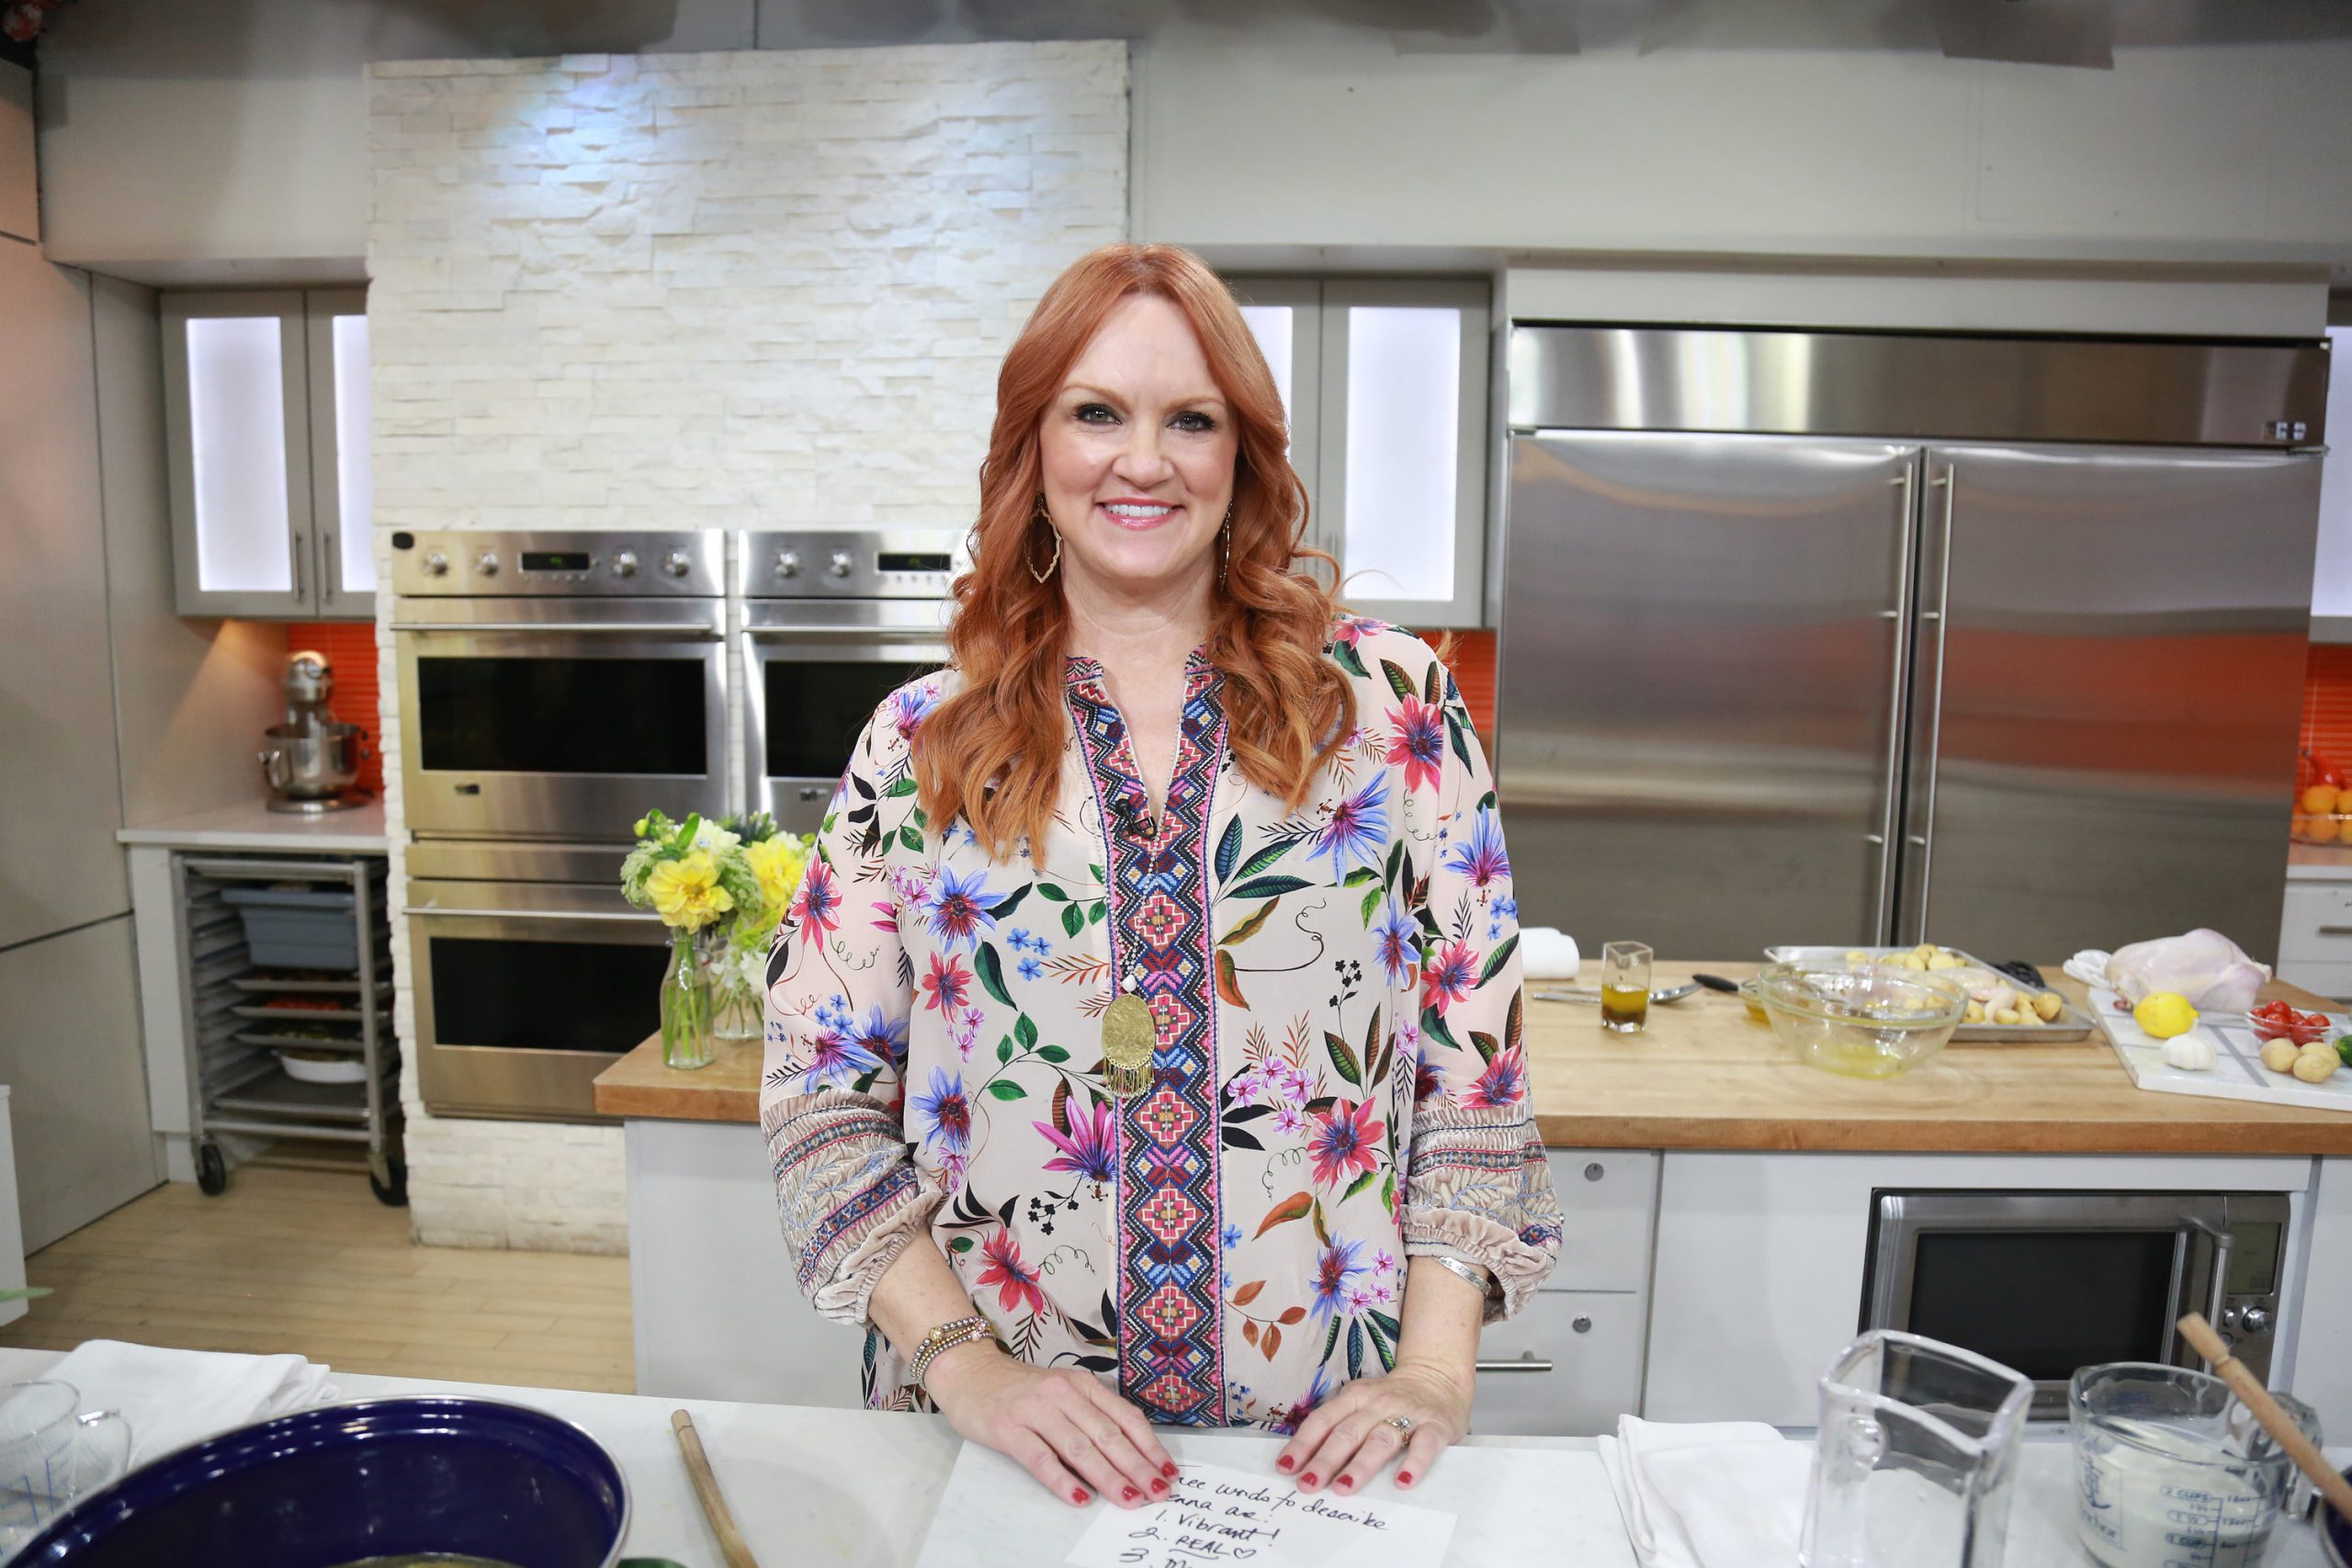 Ree Drummond smiles as she stands on the set of a talk show's kitchen set